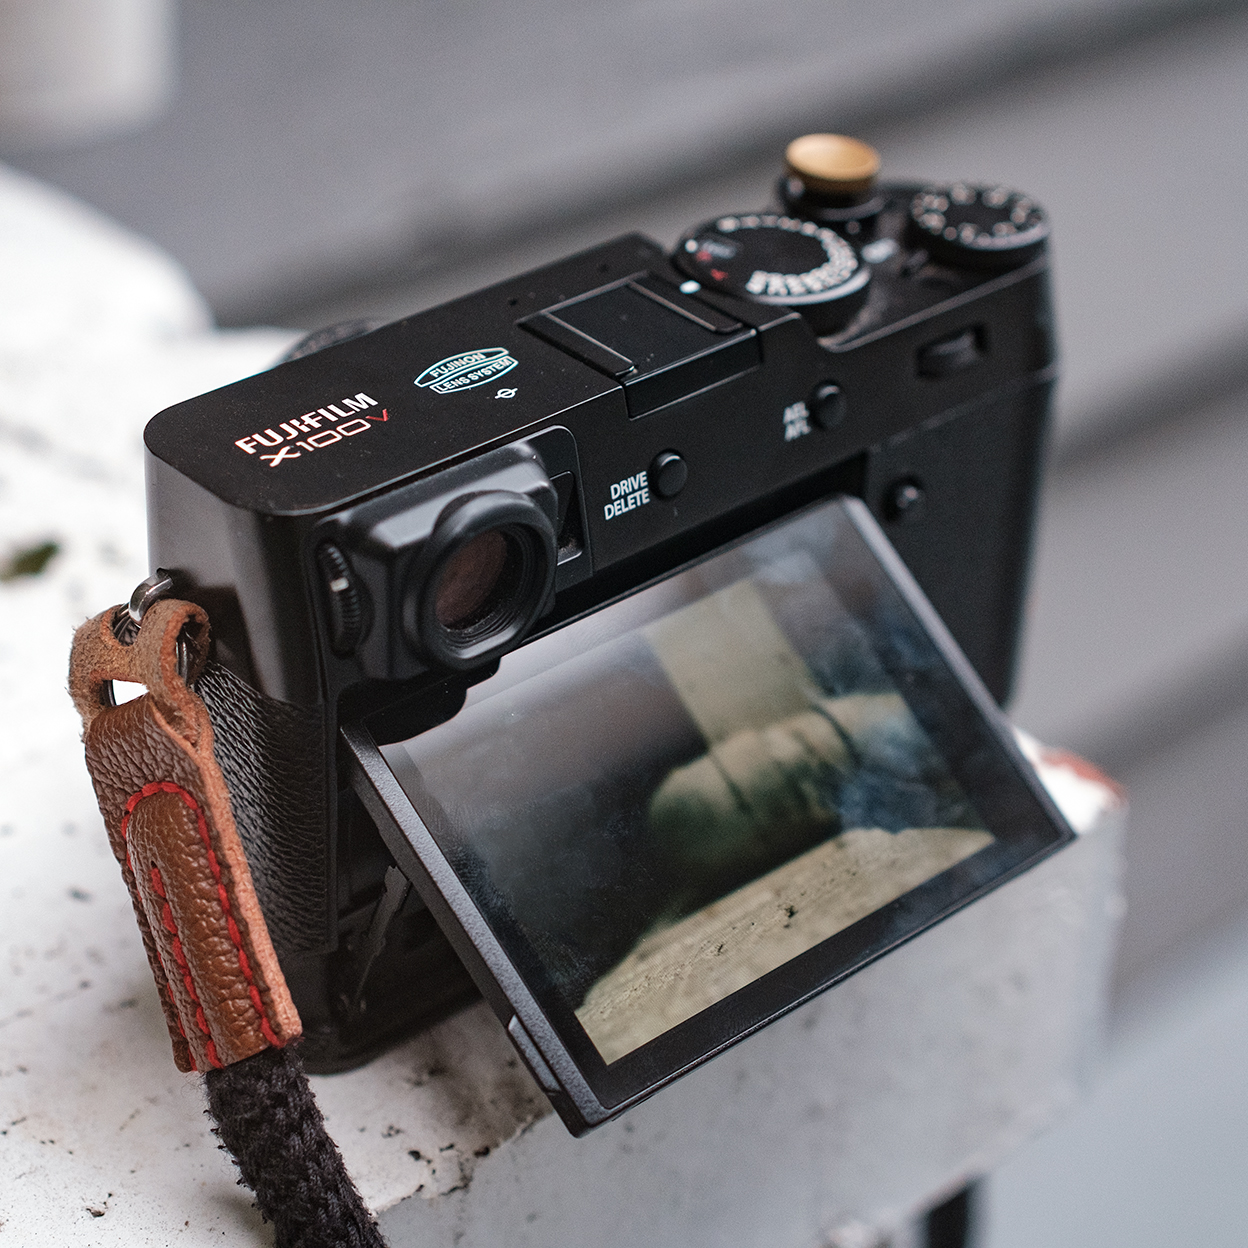 Why Fujifilm Will Have a Hard Time Improving the Almost-Perfect X100V